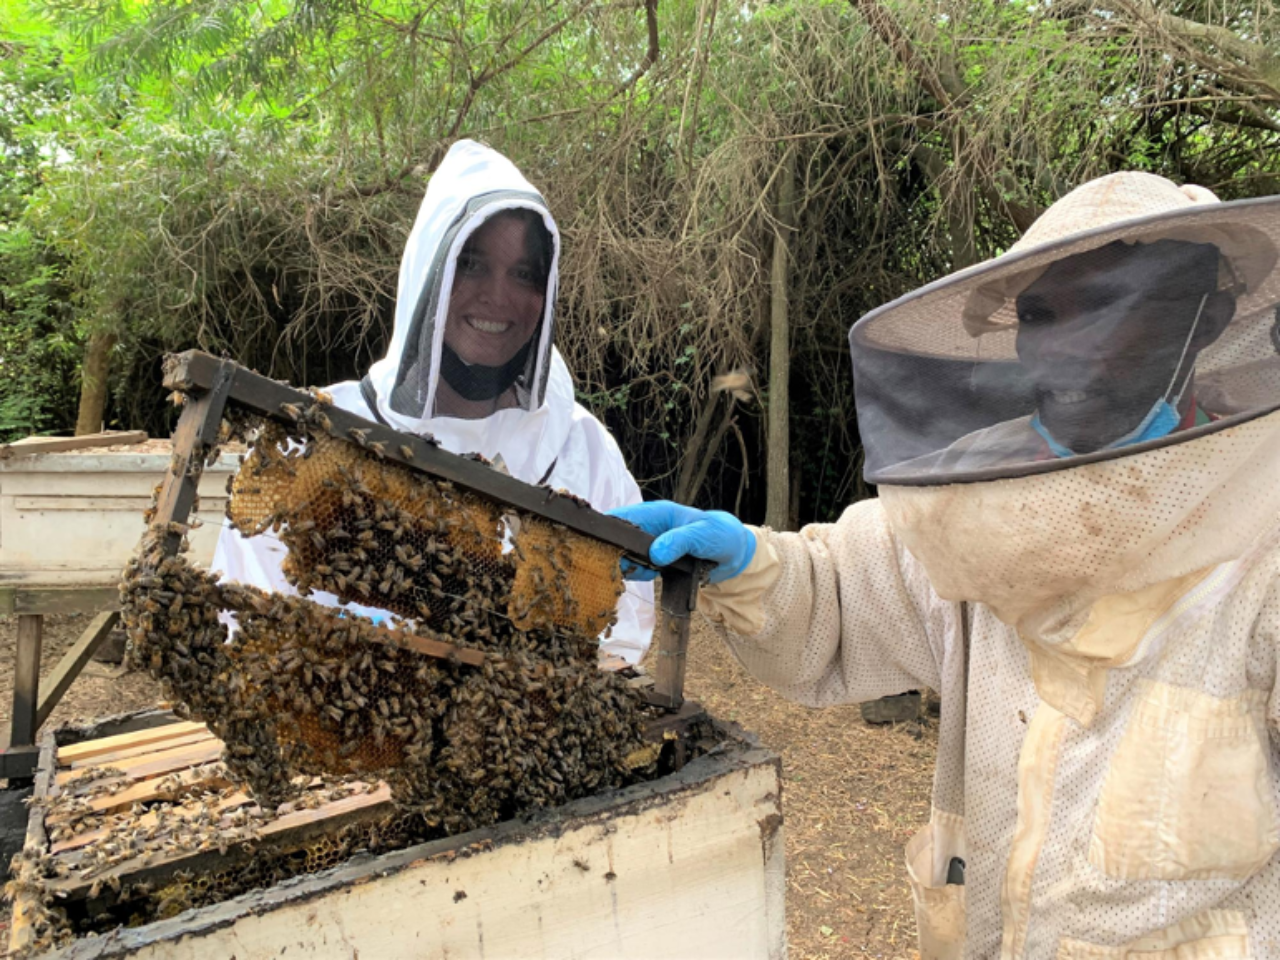 Researchers in bee suits checking on a hive